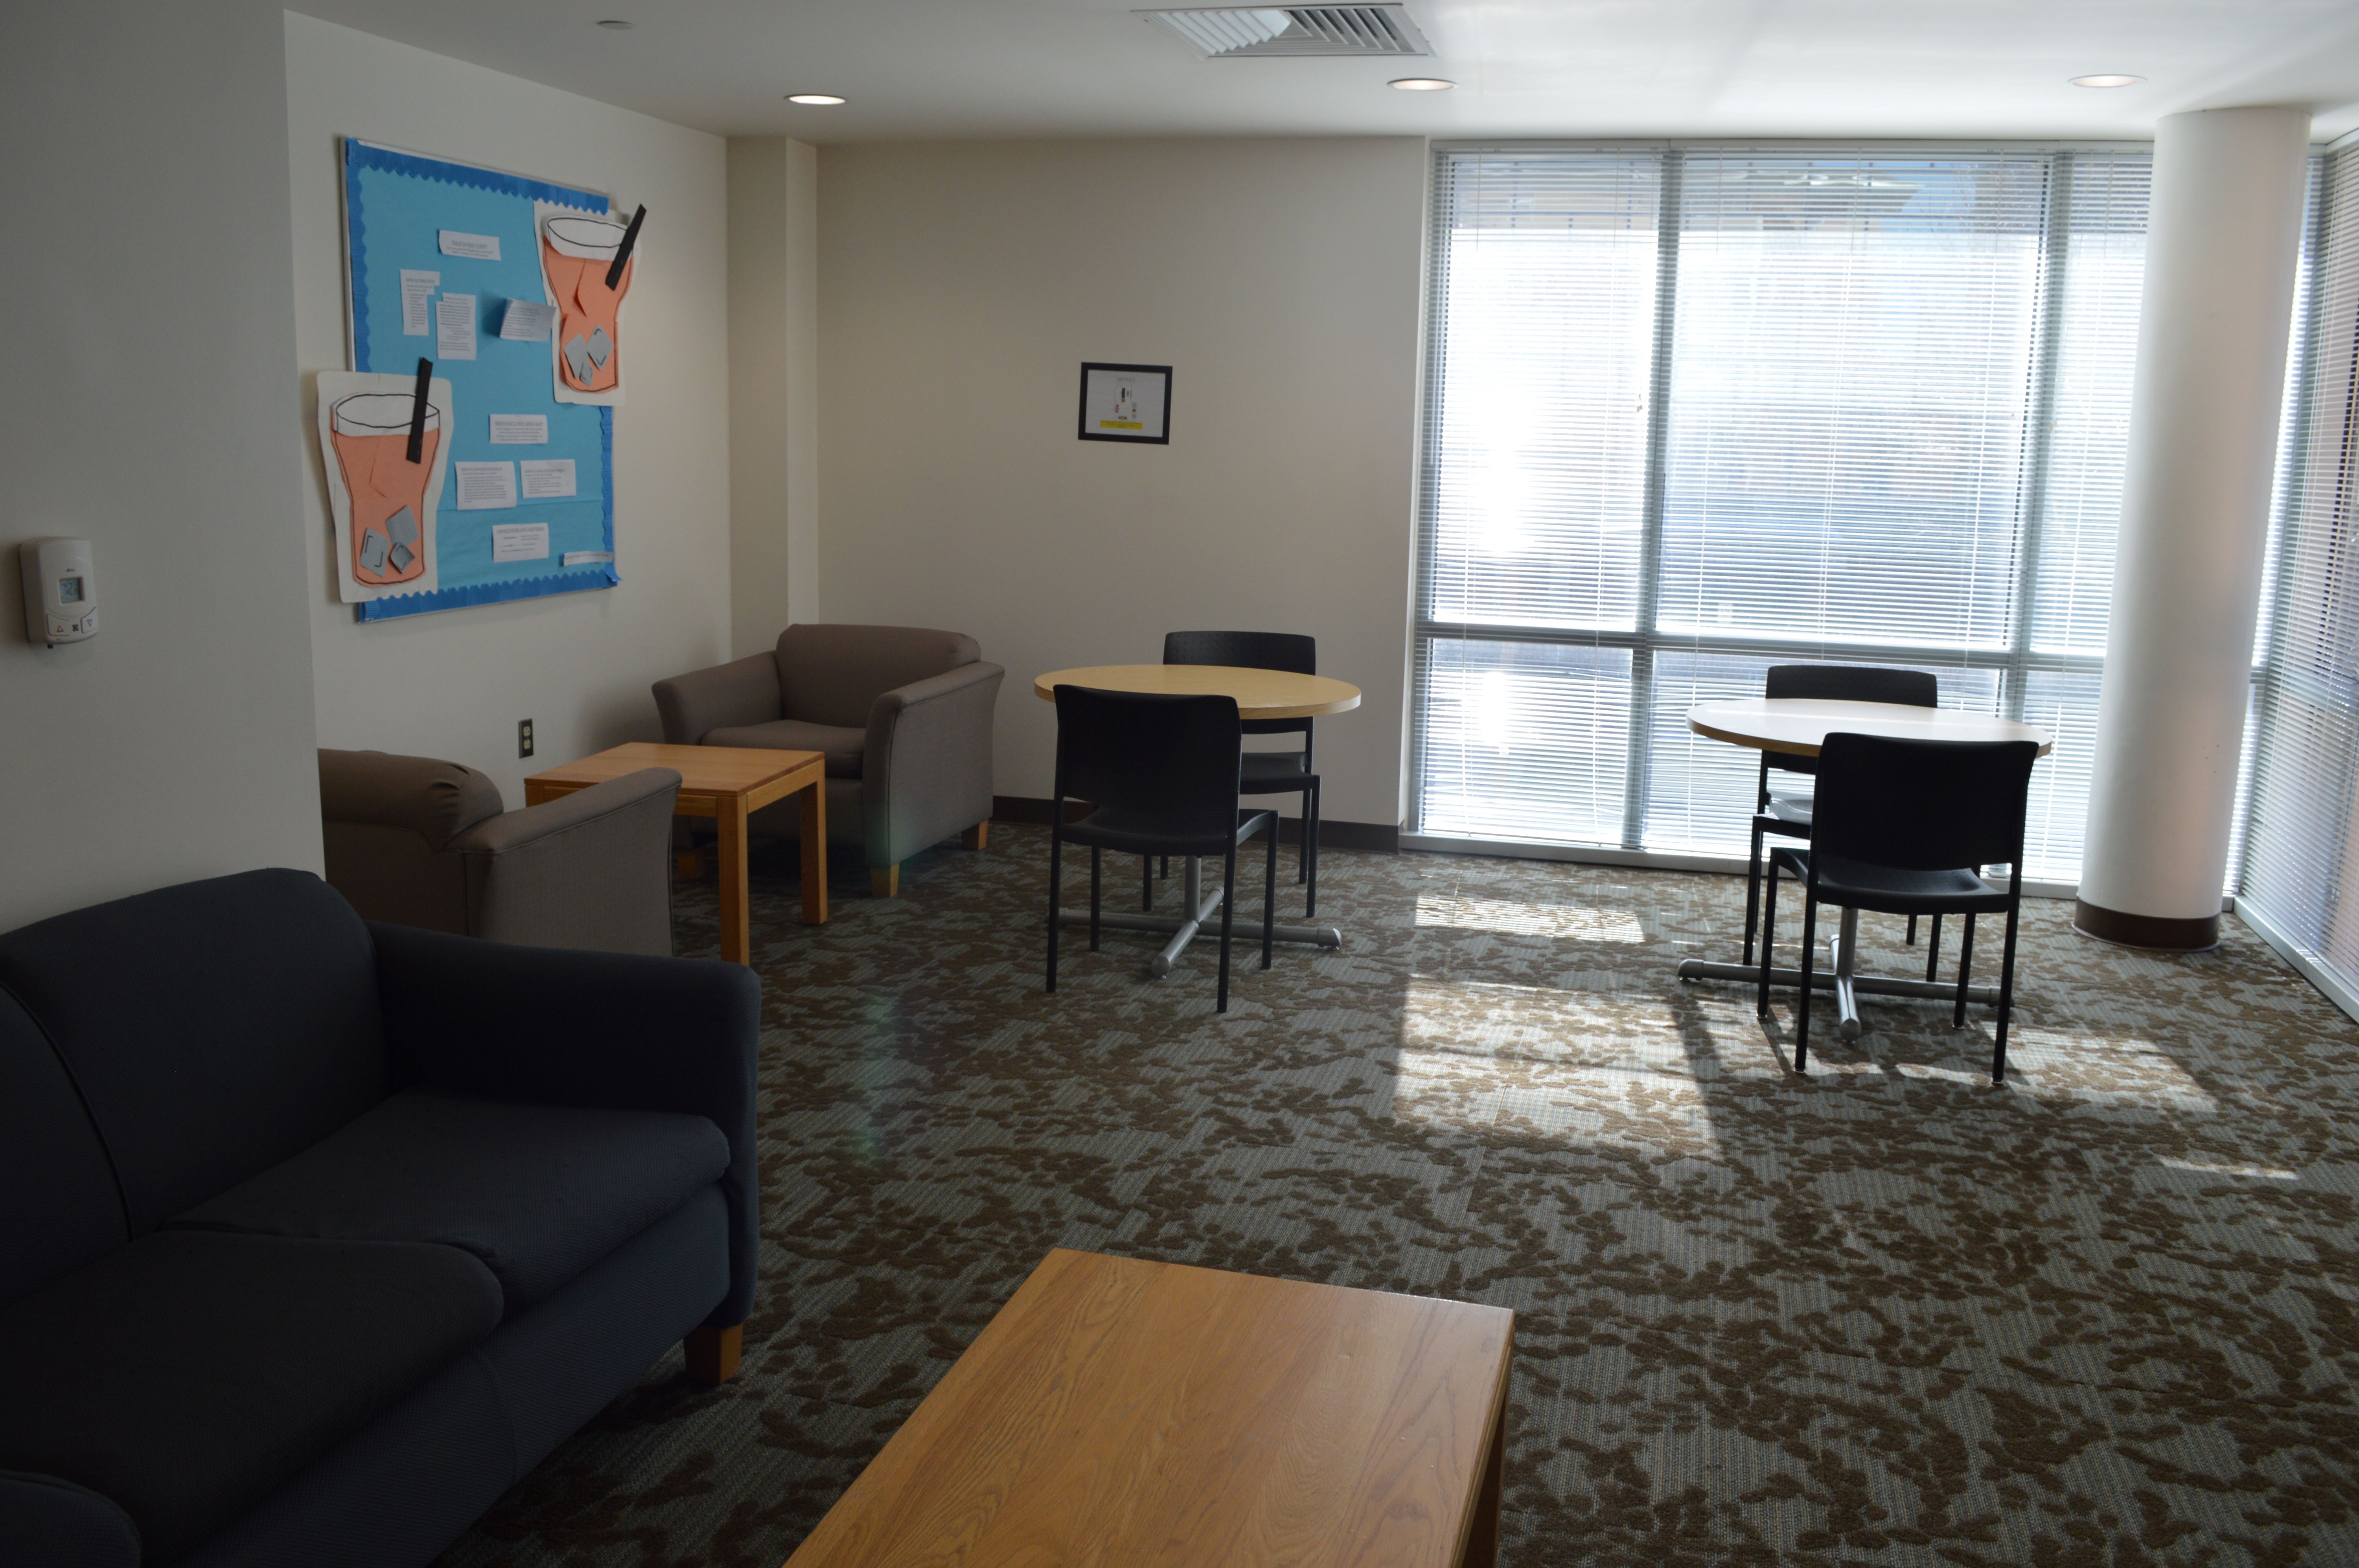 Tidewater Hall, Common Room, Housing & Residence Life